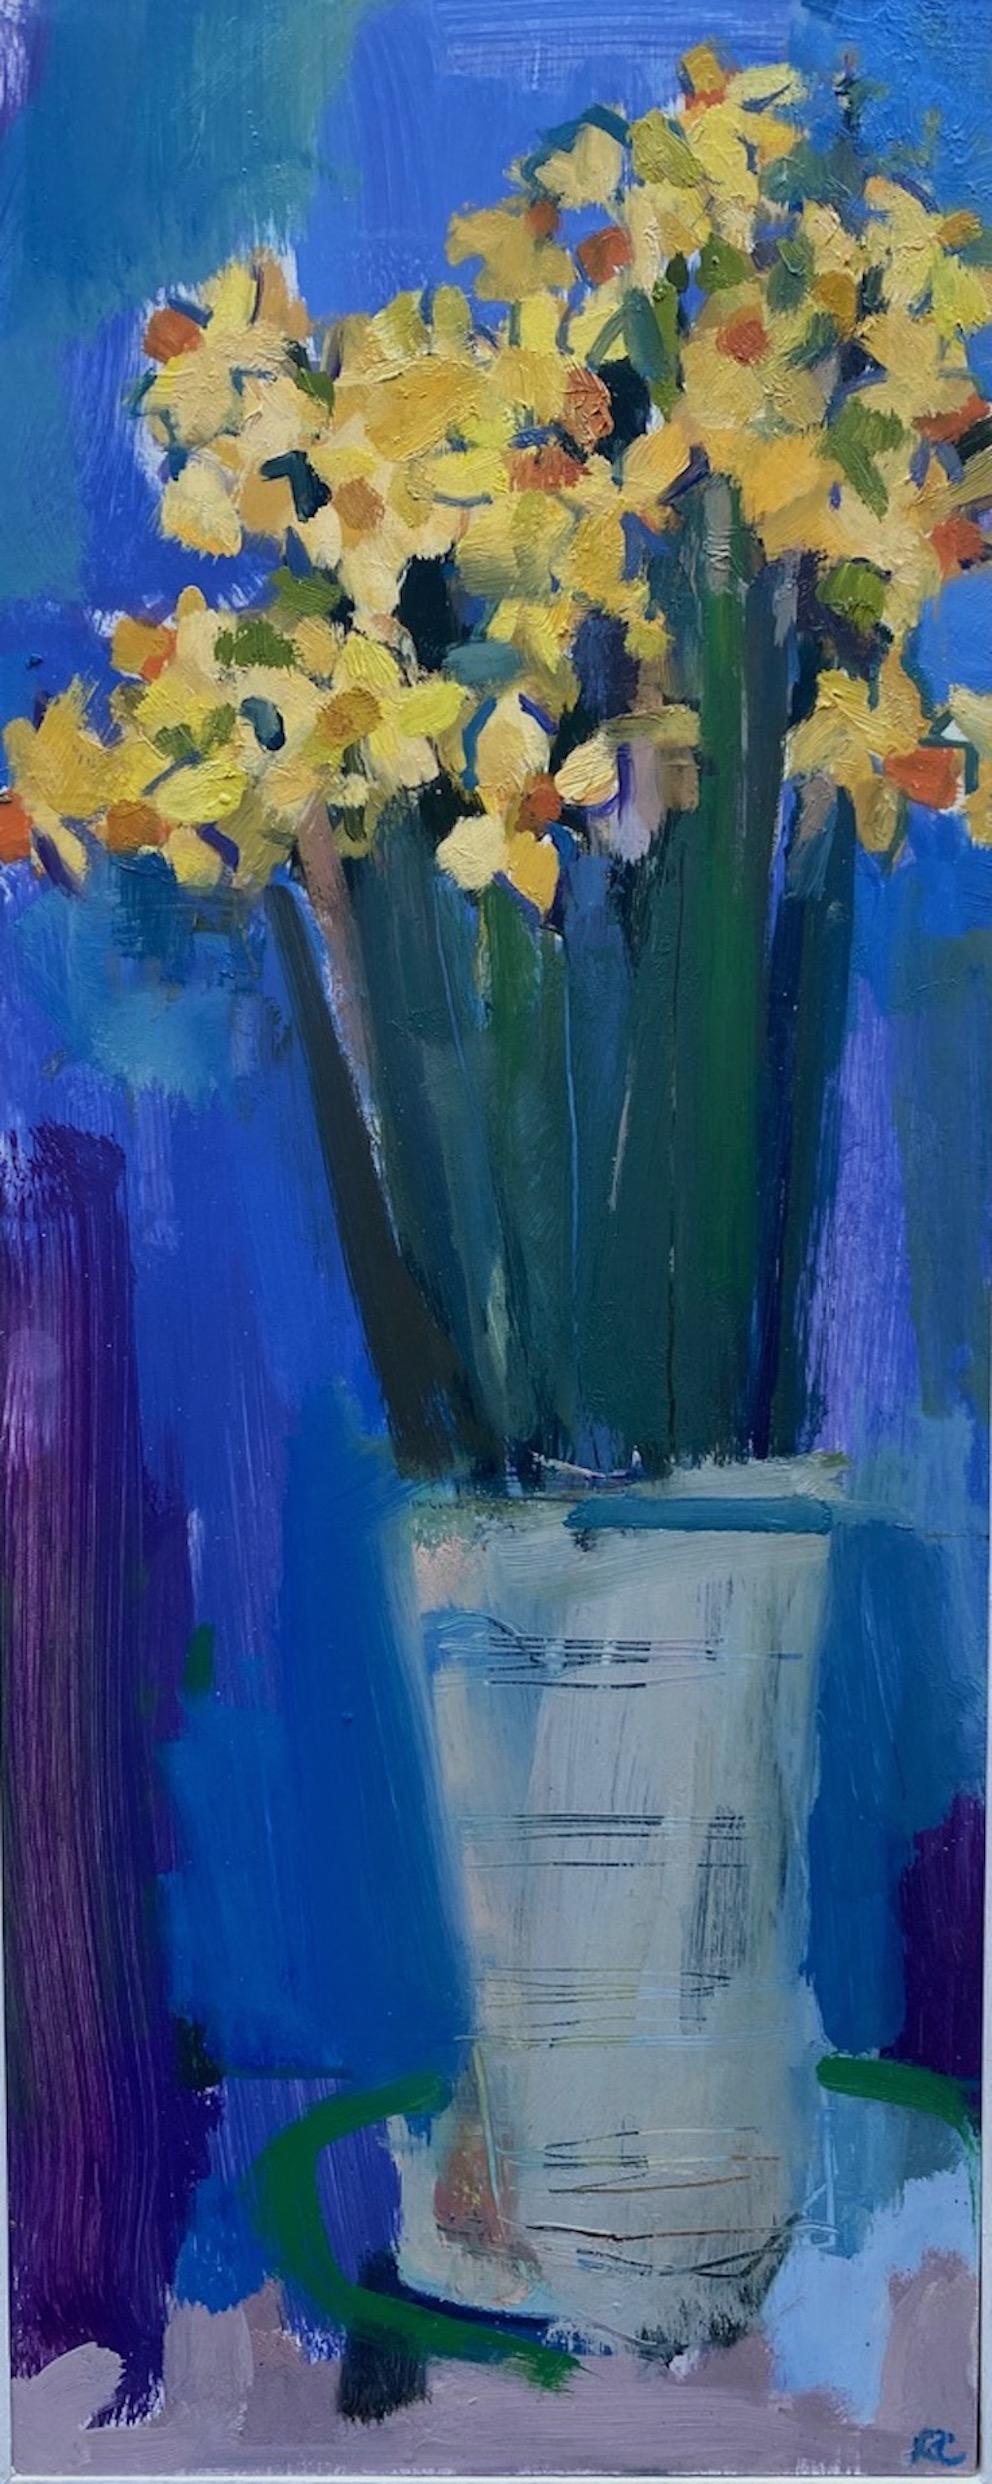 Rosie Copeland
Narcissi in a White Vase [2019]
Original
Flowers
Oil paint on board
Image size: H:66 cm x W:36 cm
Complete Size of Unframed Work: H:50 cm x W:20 cm x D:1cm
Frame Size: H:66 cm x W:36 cm x D:4.5cm
Sold Framed

Please note that insitu